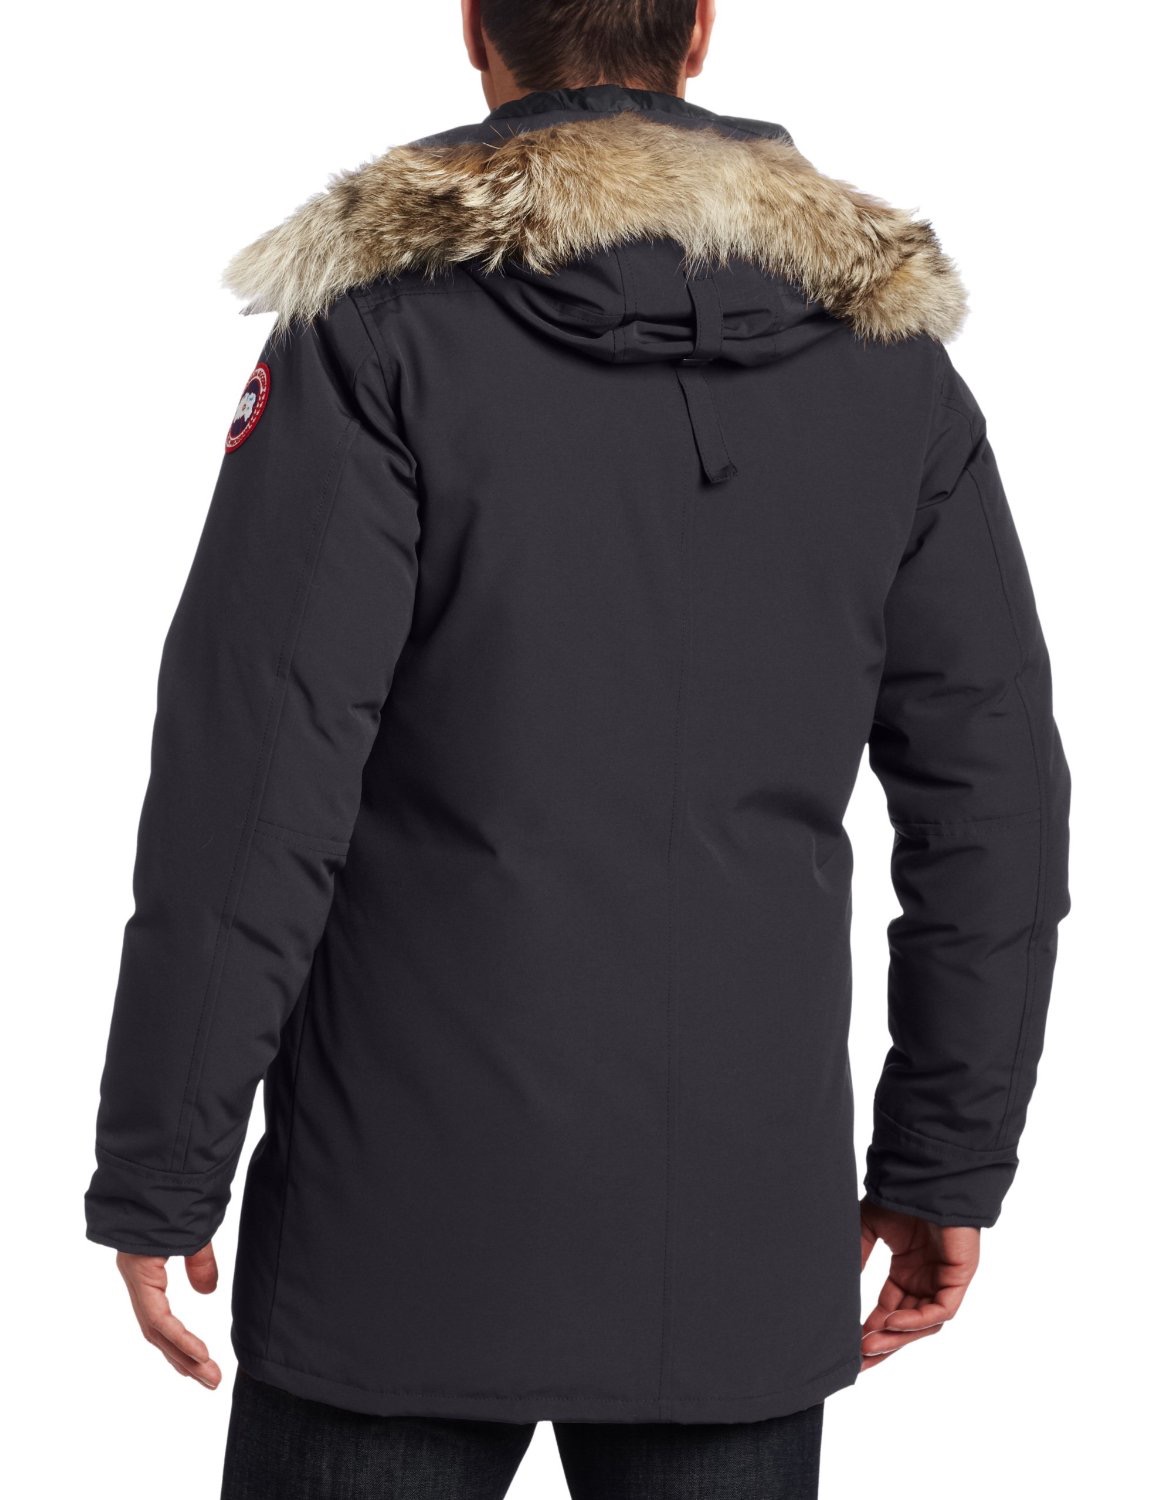 do canada goose jackets have real fur